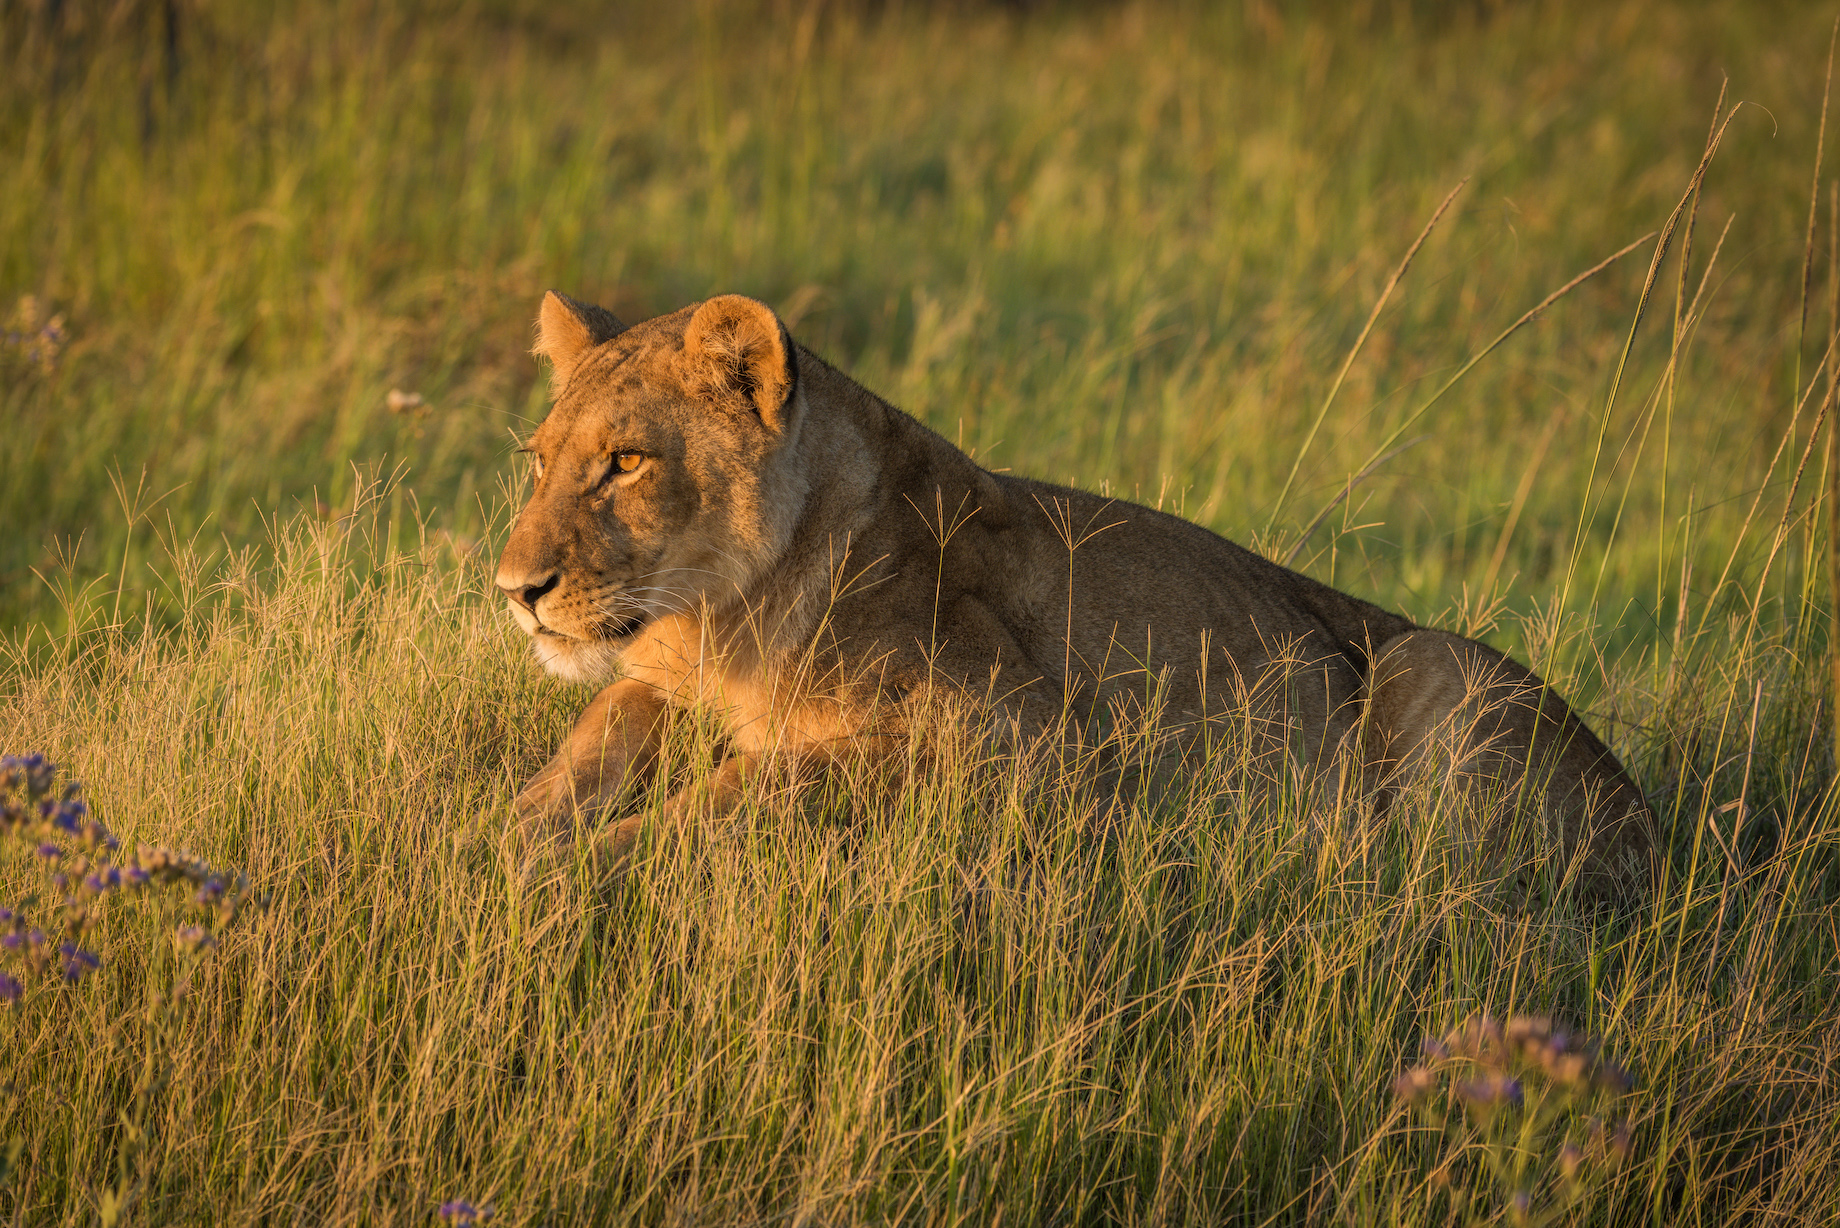 Lion lies staring in grass at dusk